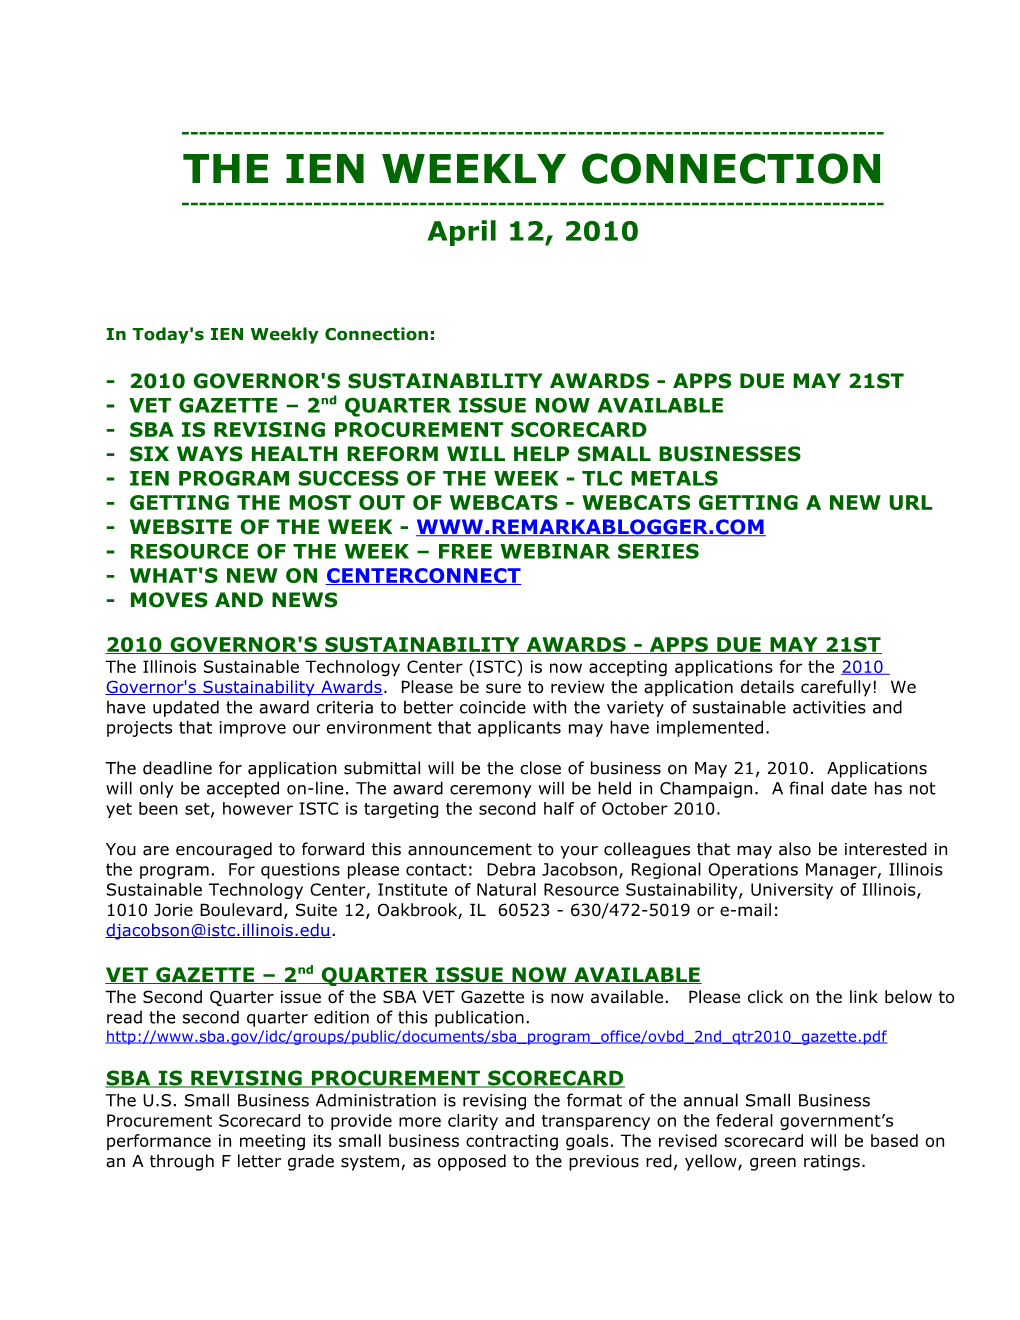 In Today'sien Weekly Connection s10